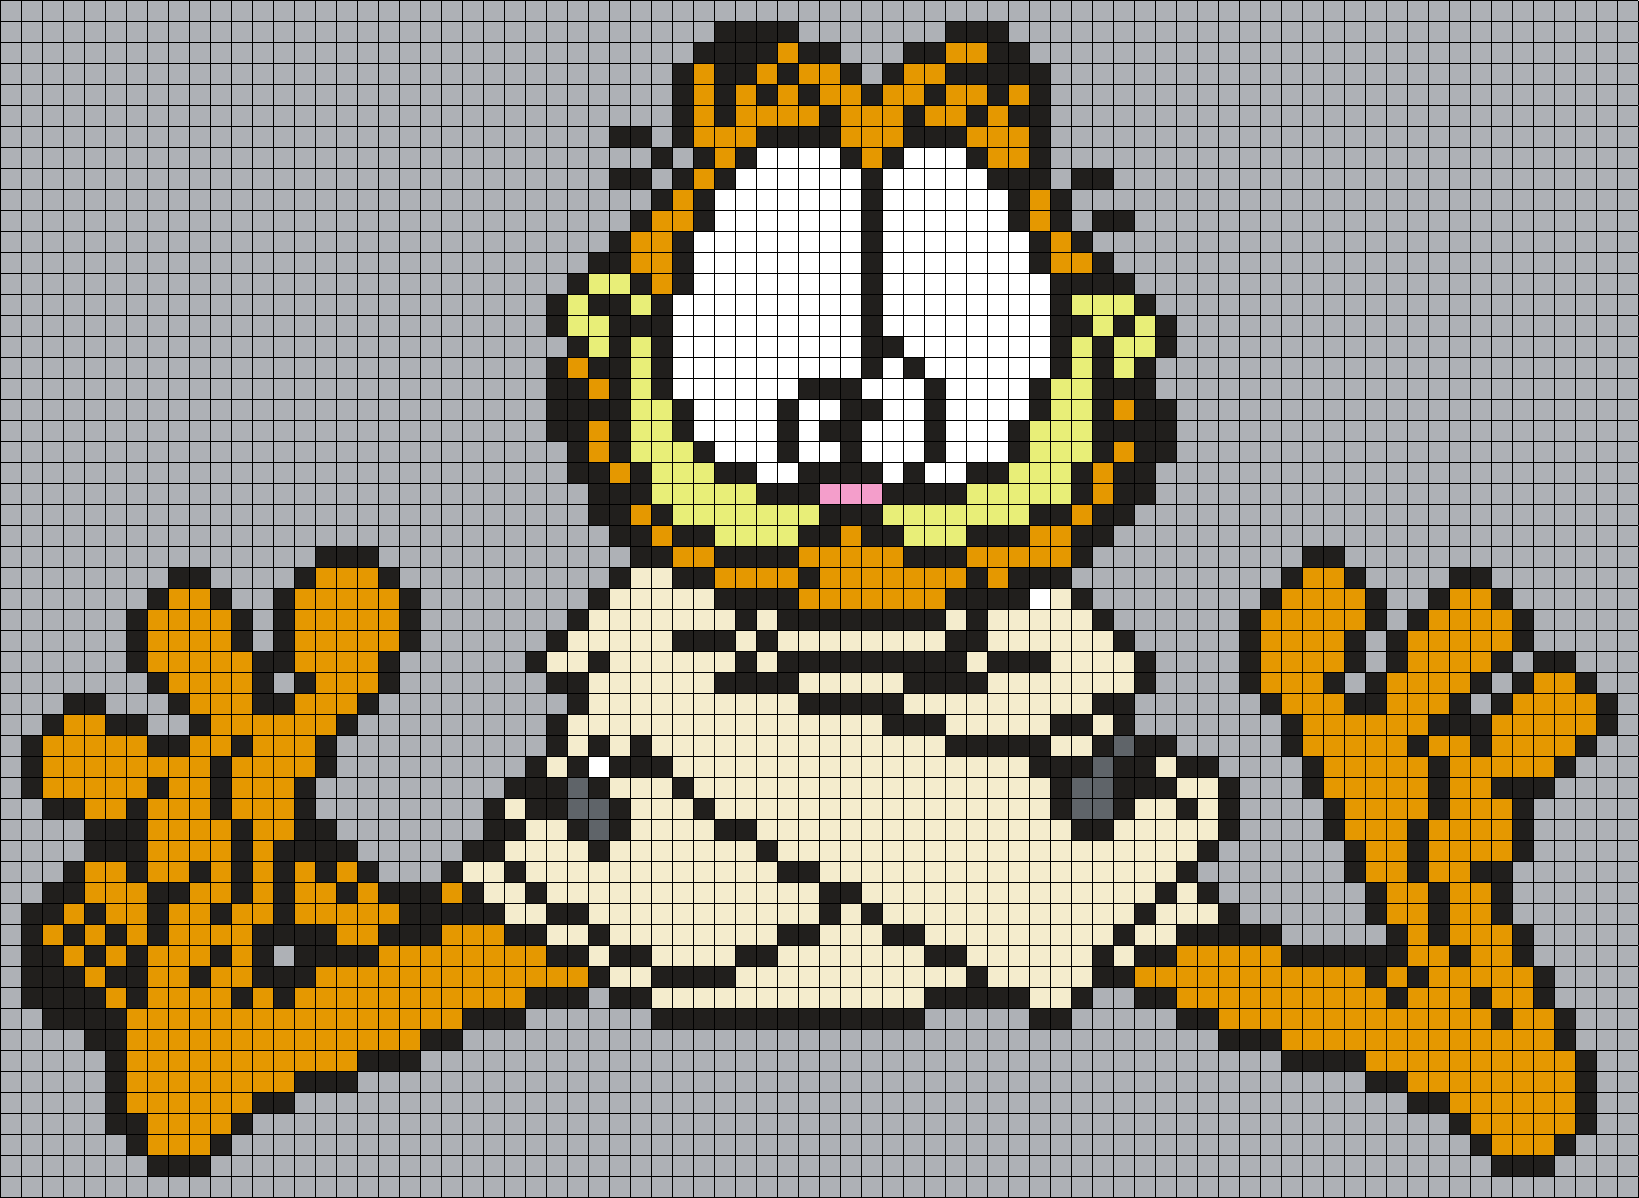 Garfield In A Straight Jacket (Square)